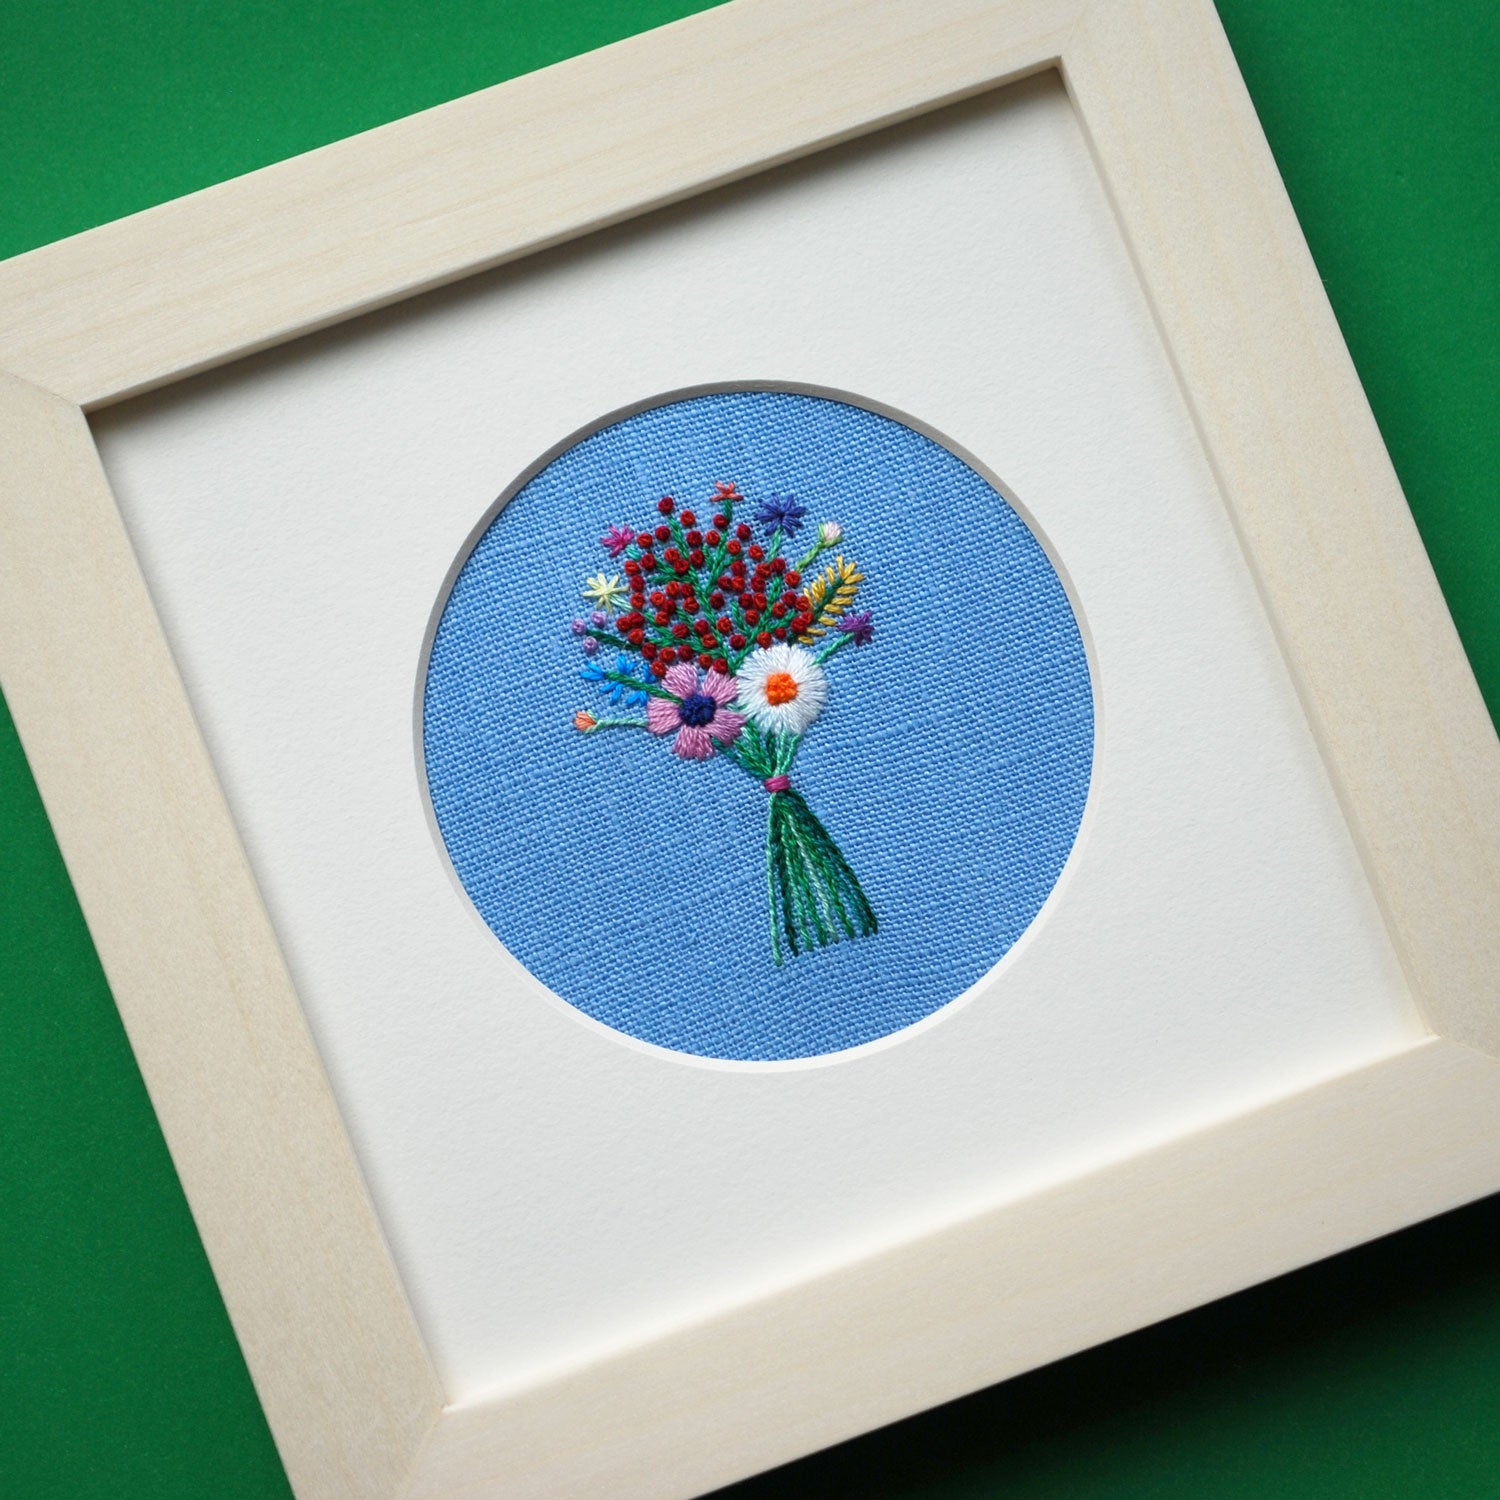 Rainbow Bouquet with Red Buds on Blue Linen Hand Embroidered Art